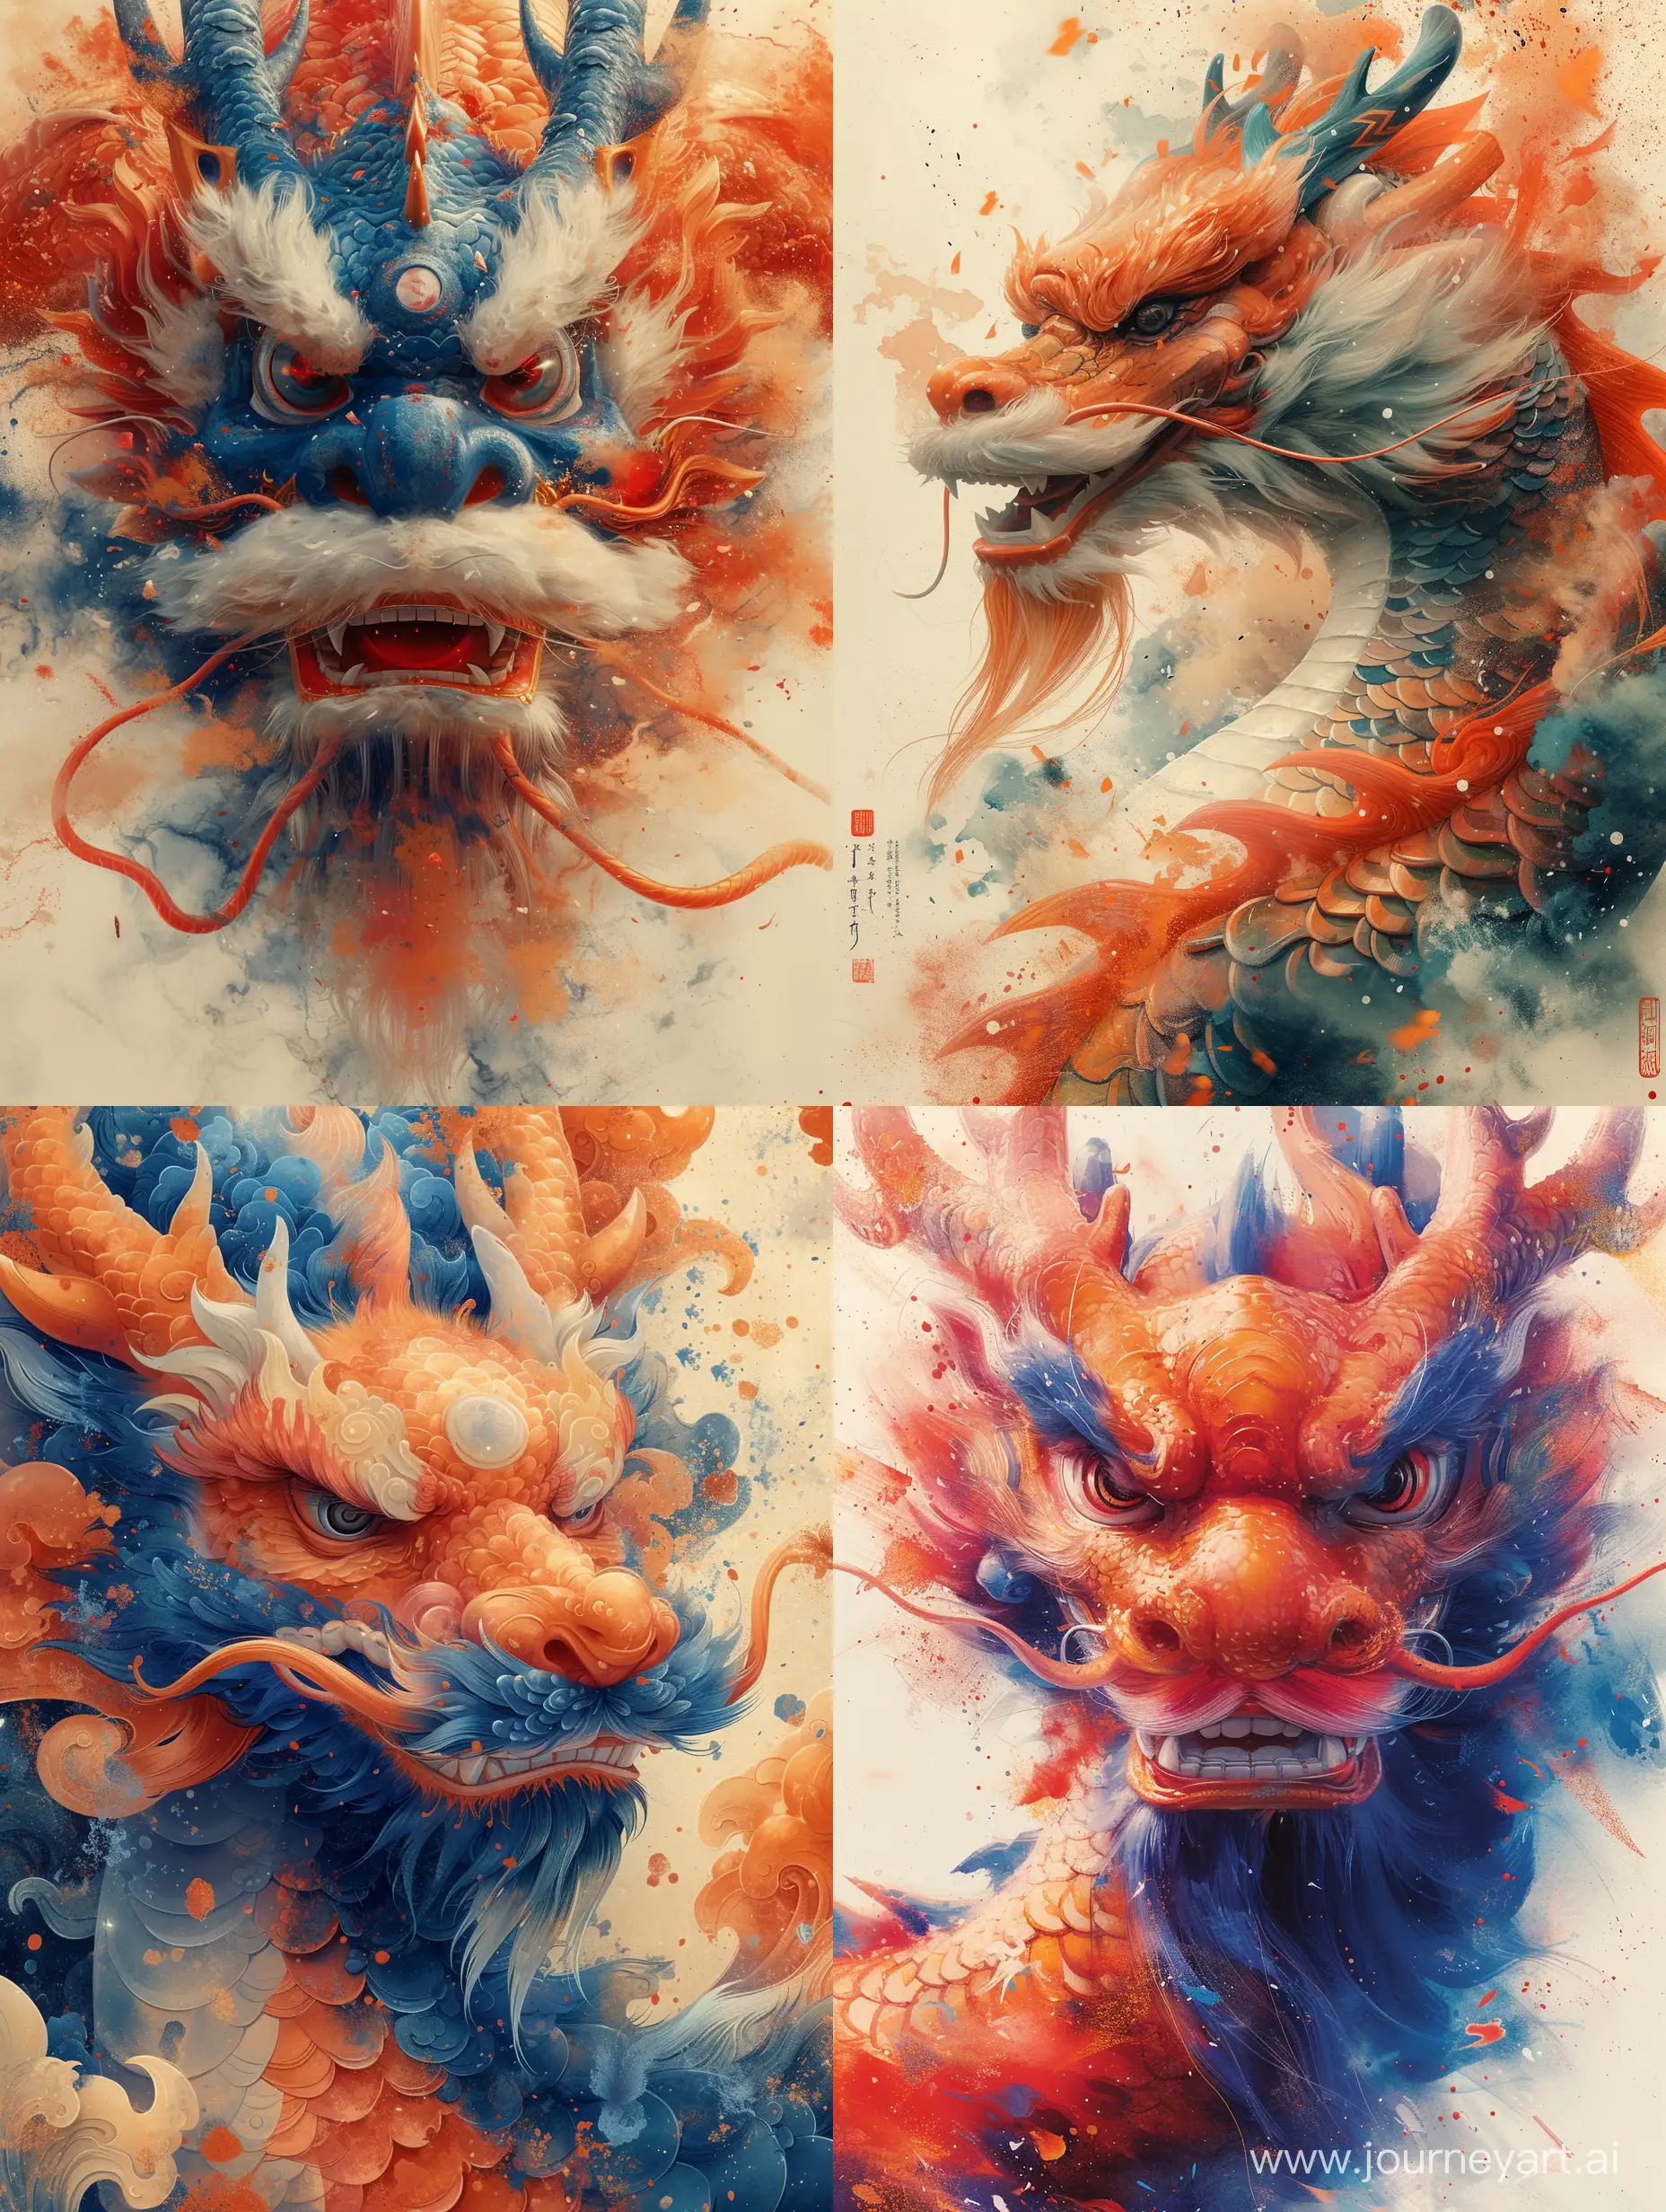 Create an illustration of a happy Chinese dragon in the style of Victo Ngai. The scene should be infused with the festive spirit of Chinese New Year, with the dragon's head in a close-up view, face front, showcasing its innocent and delightful expression. Emphasize abstract and simple lines to form the dragon's silhouette and details. The image should employ multi-color and sophisticated color matching techniques to bring out the celebration's vibrancy, --ar 3:4 --s 1000 --v 6.0